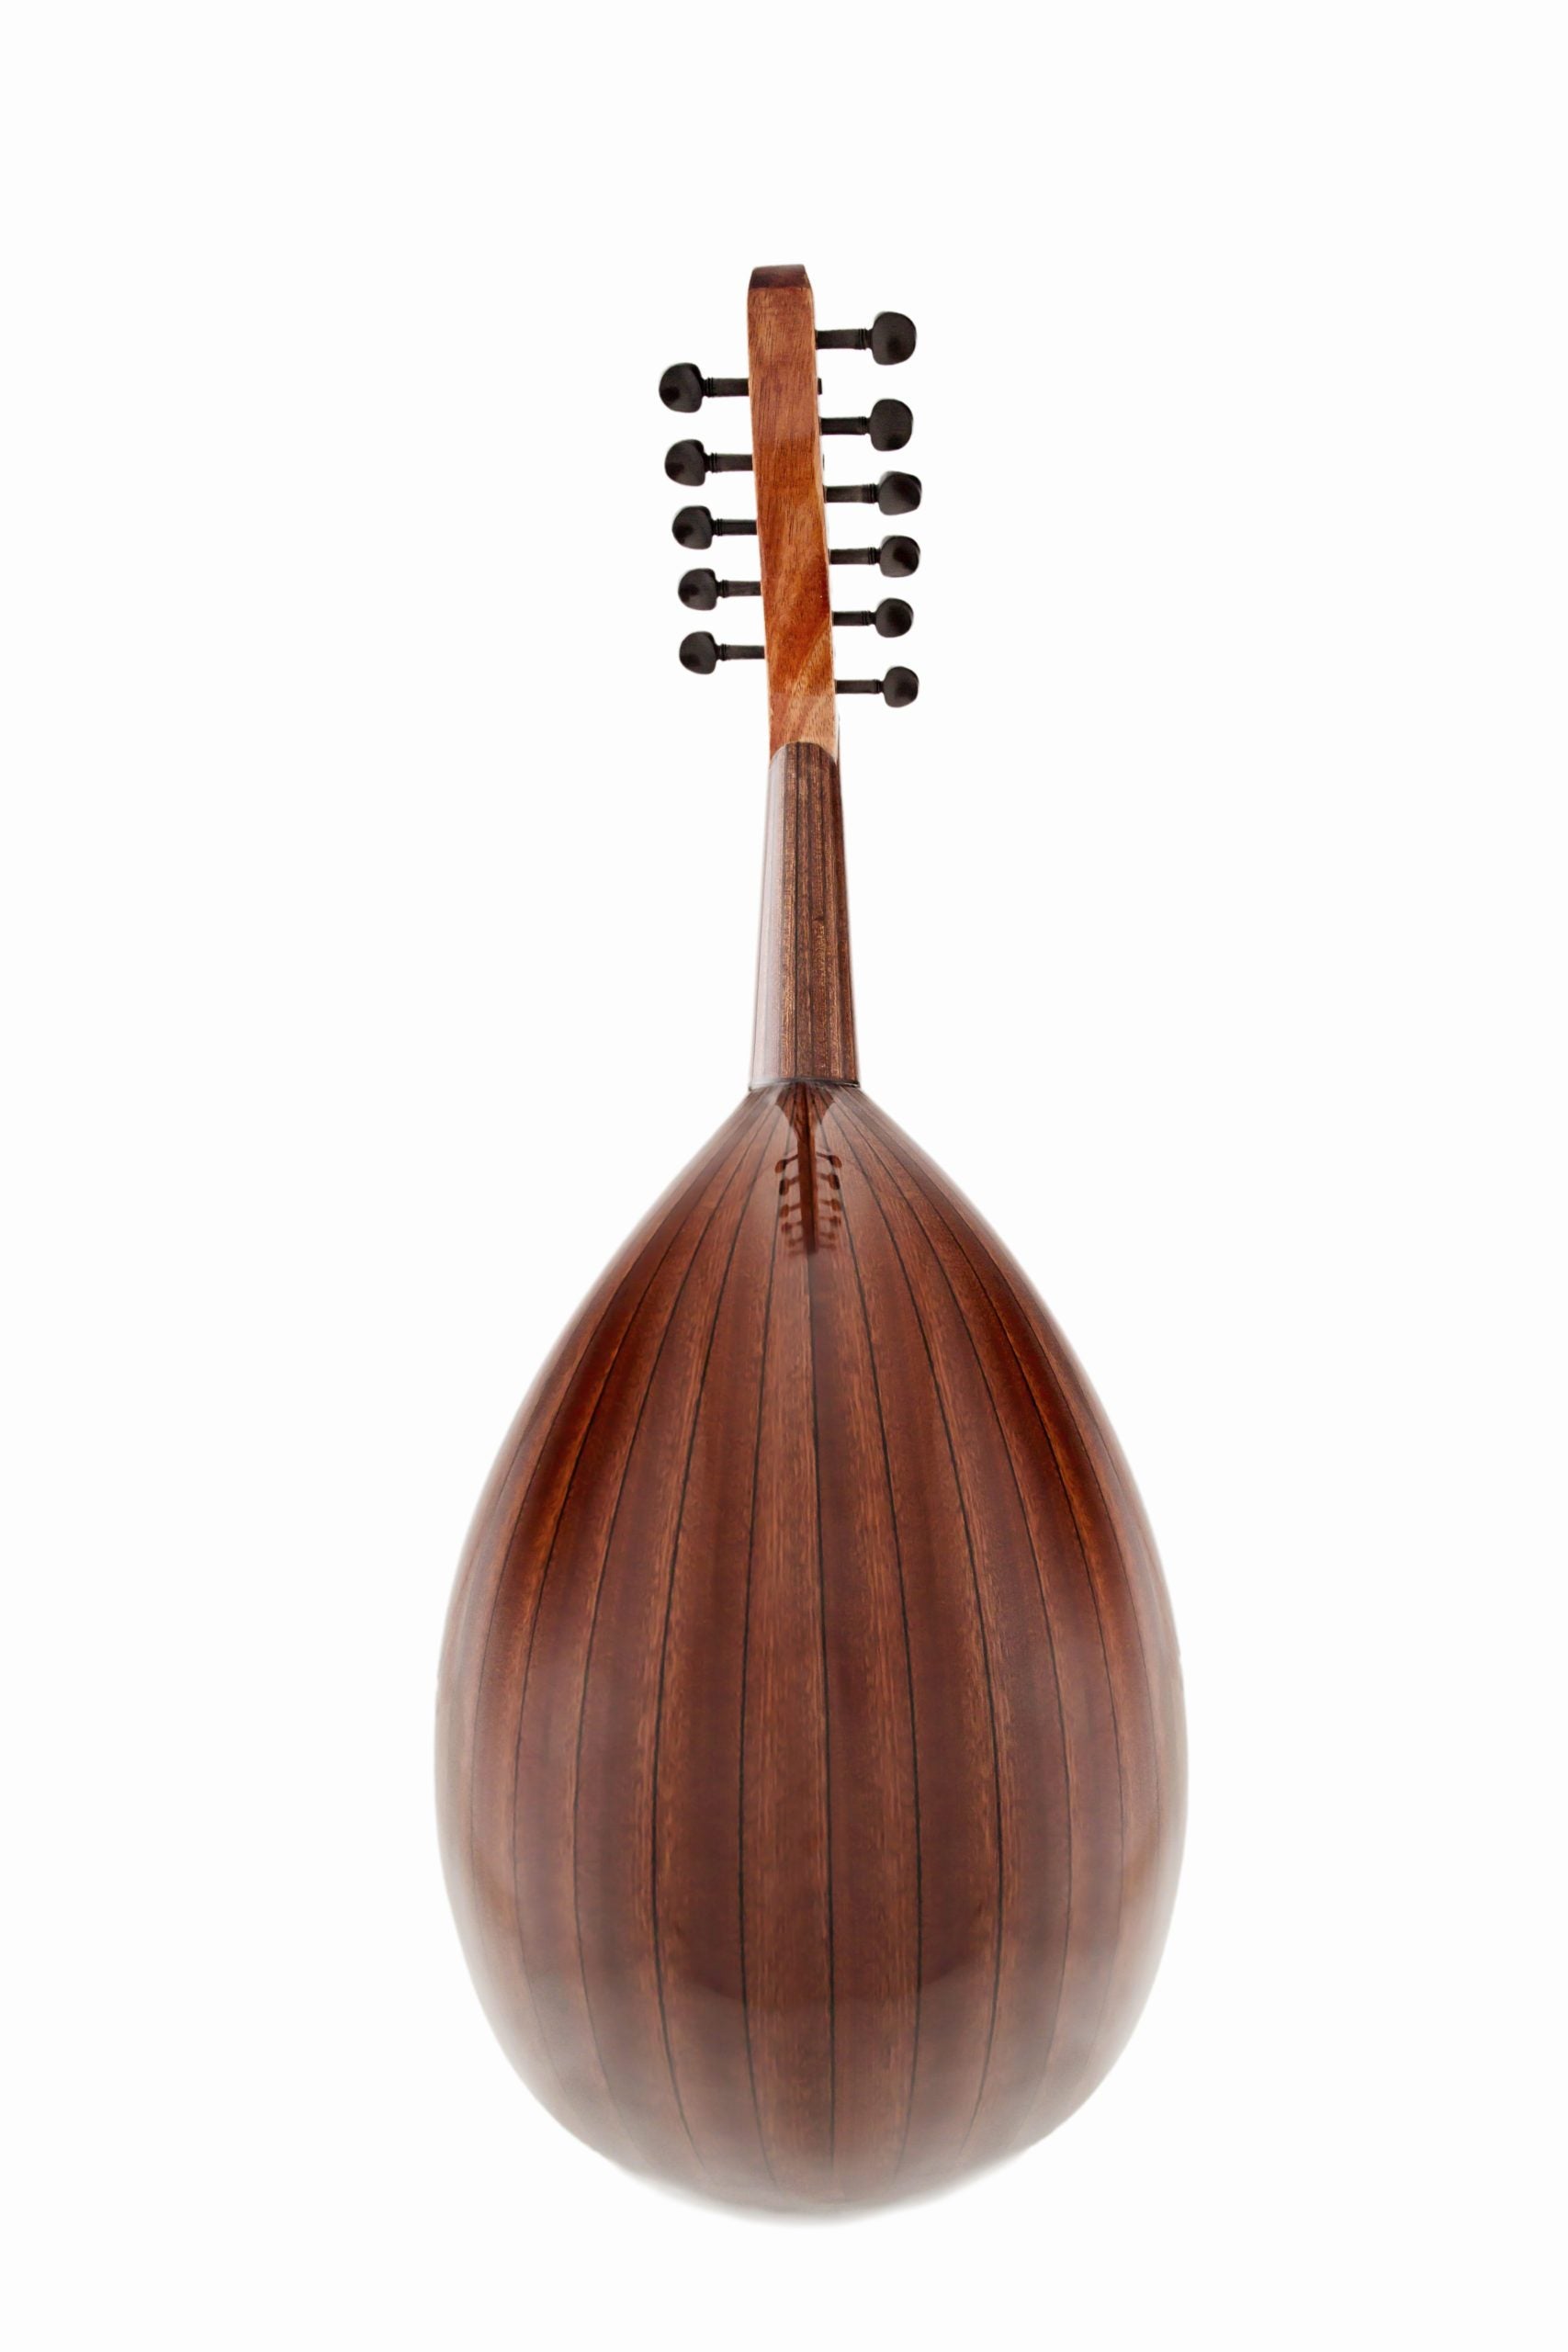 BL100 Mahogany Oud with Stripe: A Perfect Oud for Beginners